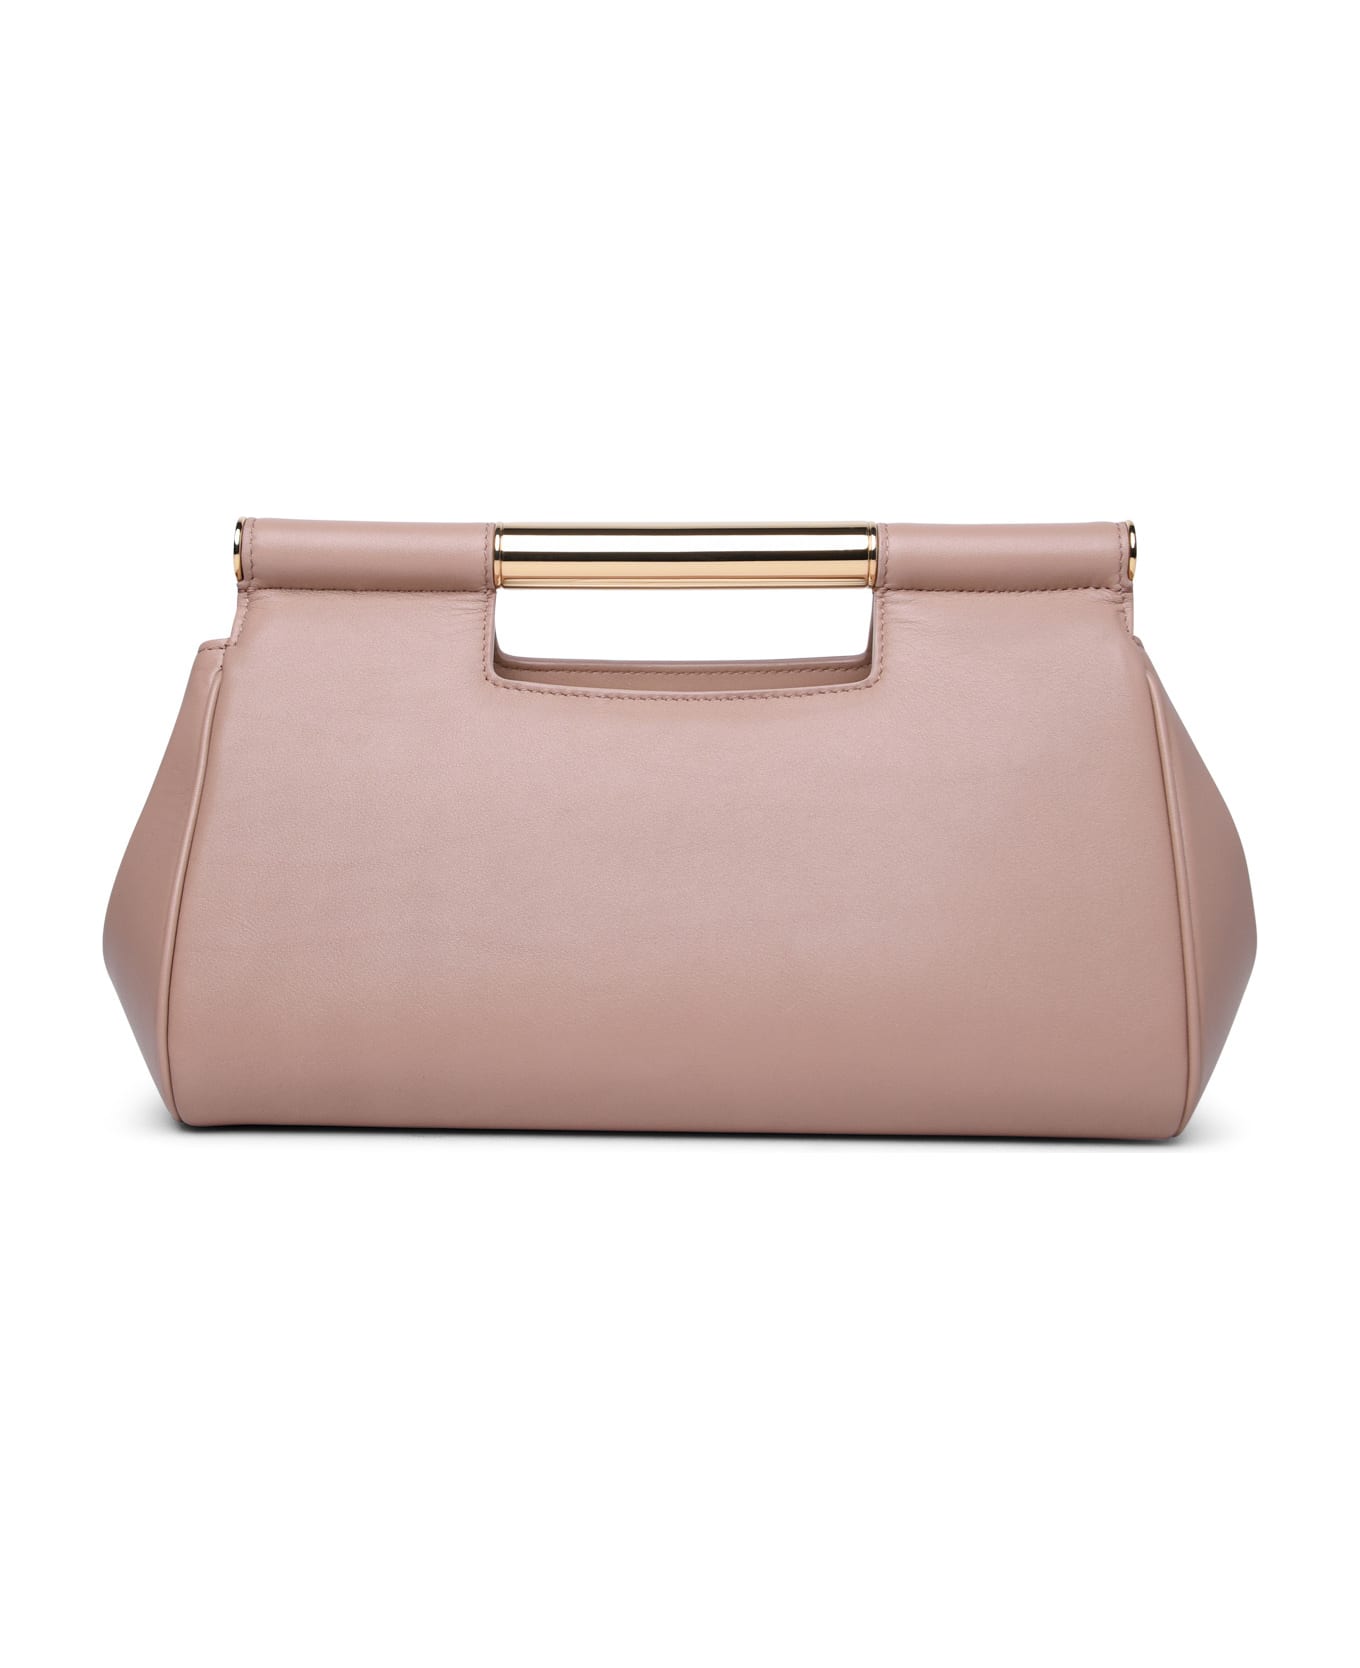 Dolce & Gabbana Sicily' Large Leather Clutch Nude - Beige クラッチバッグ